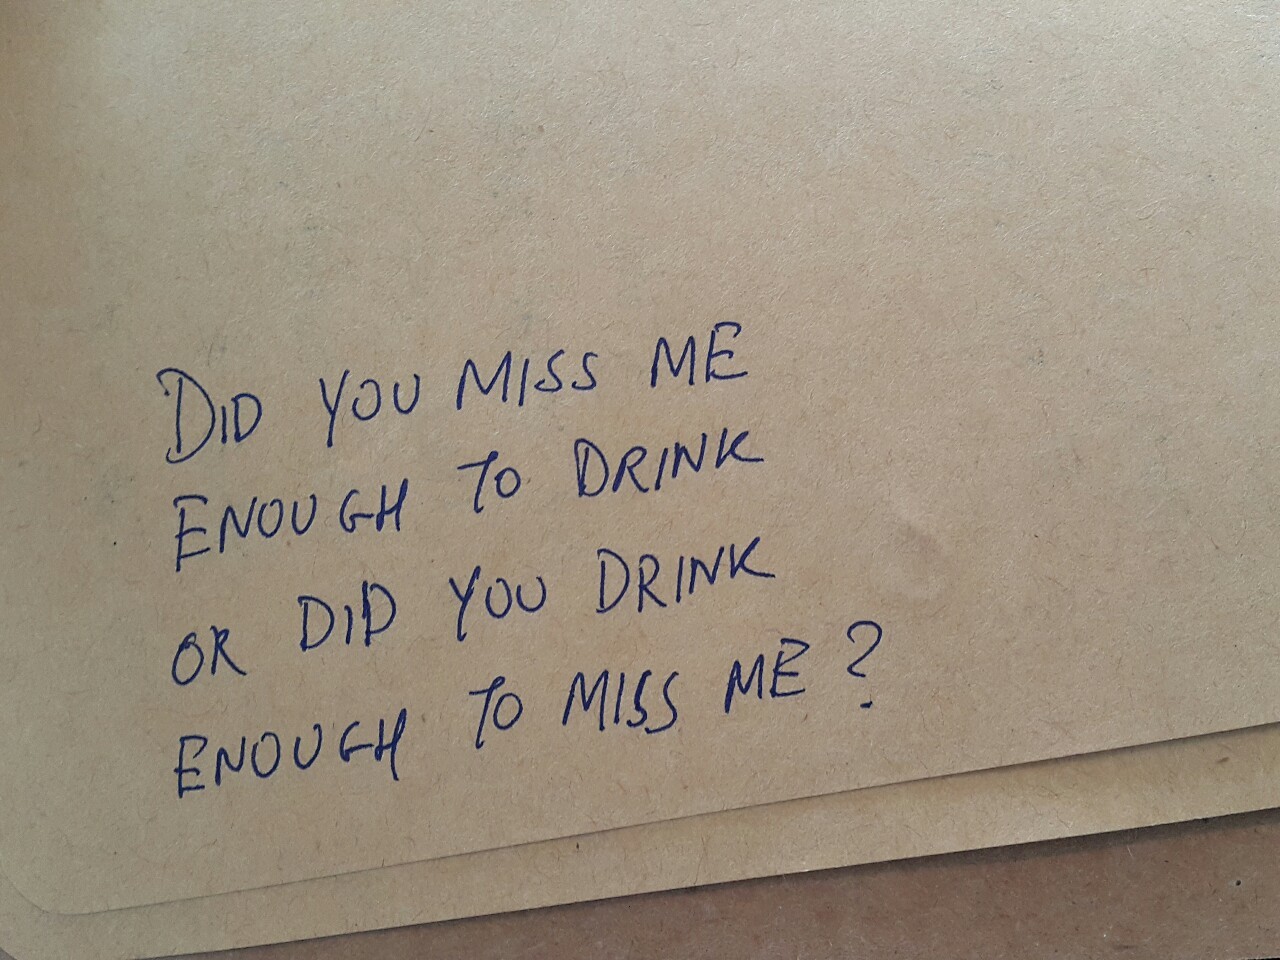 Did you really miss me?
– Lukas W.